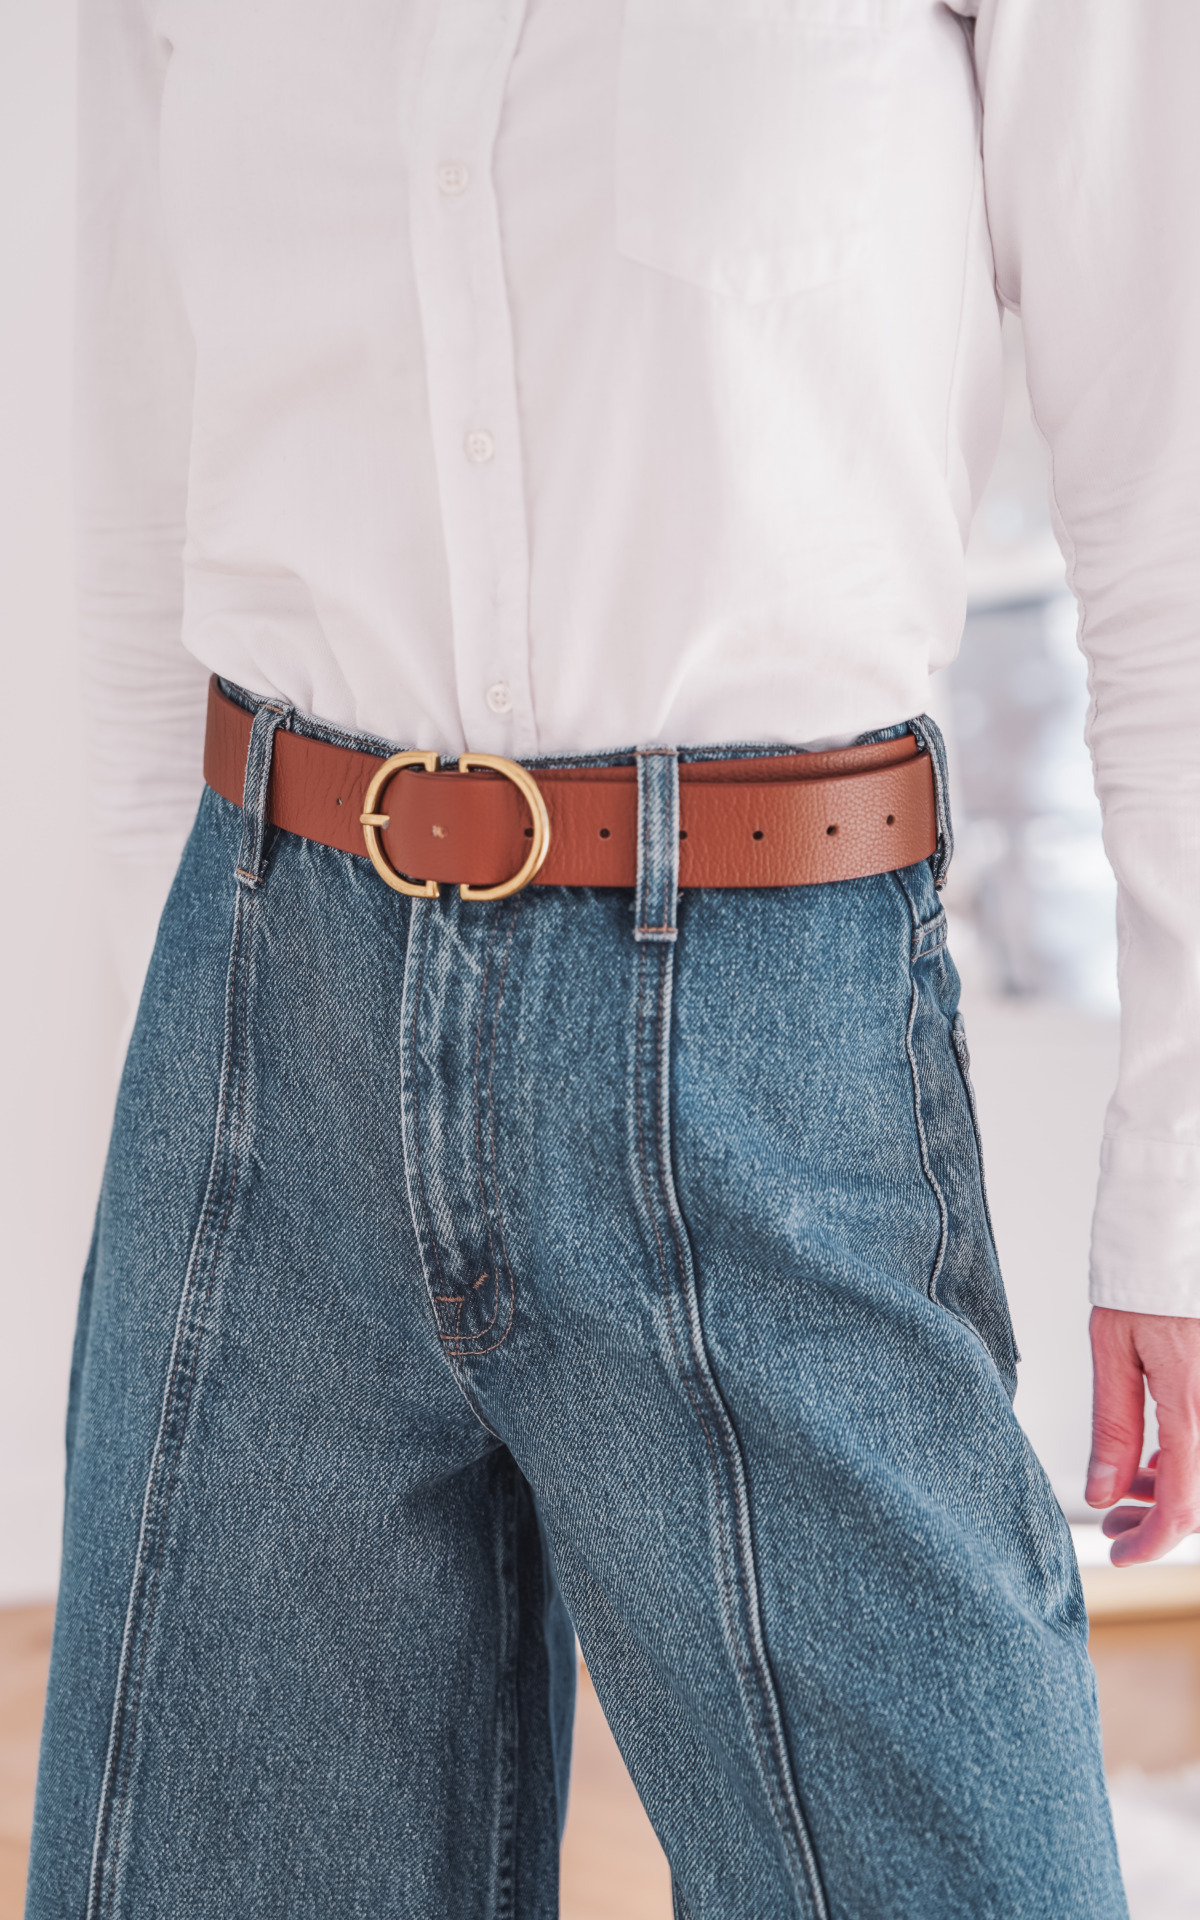 jeans with brown belt